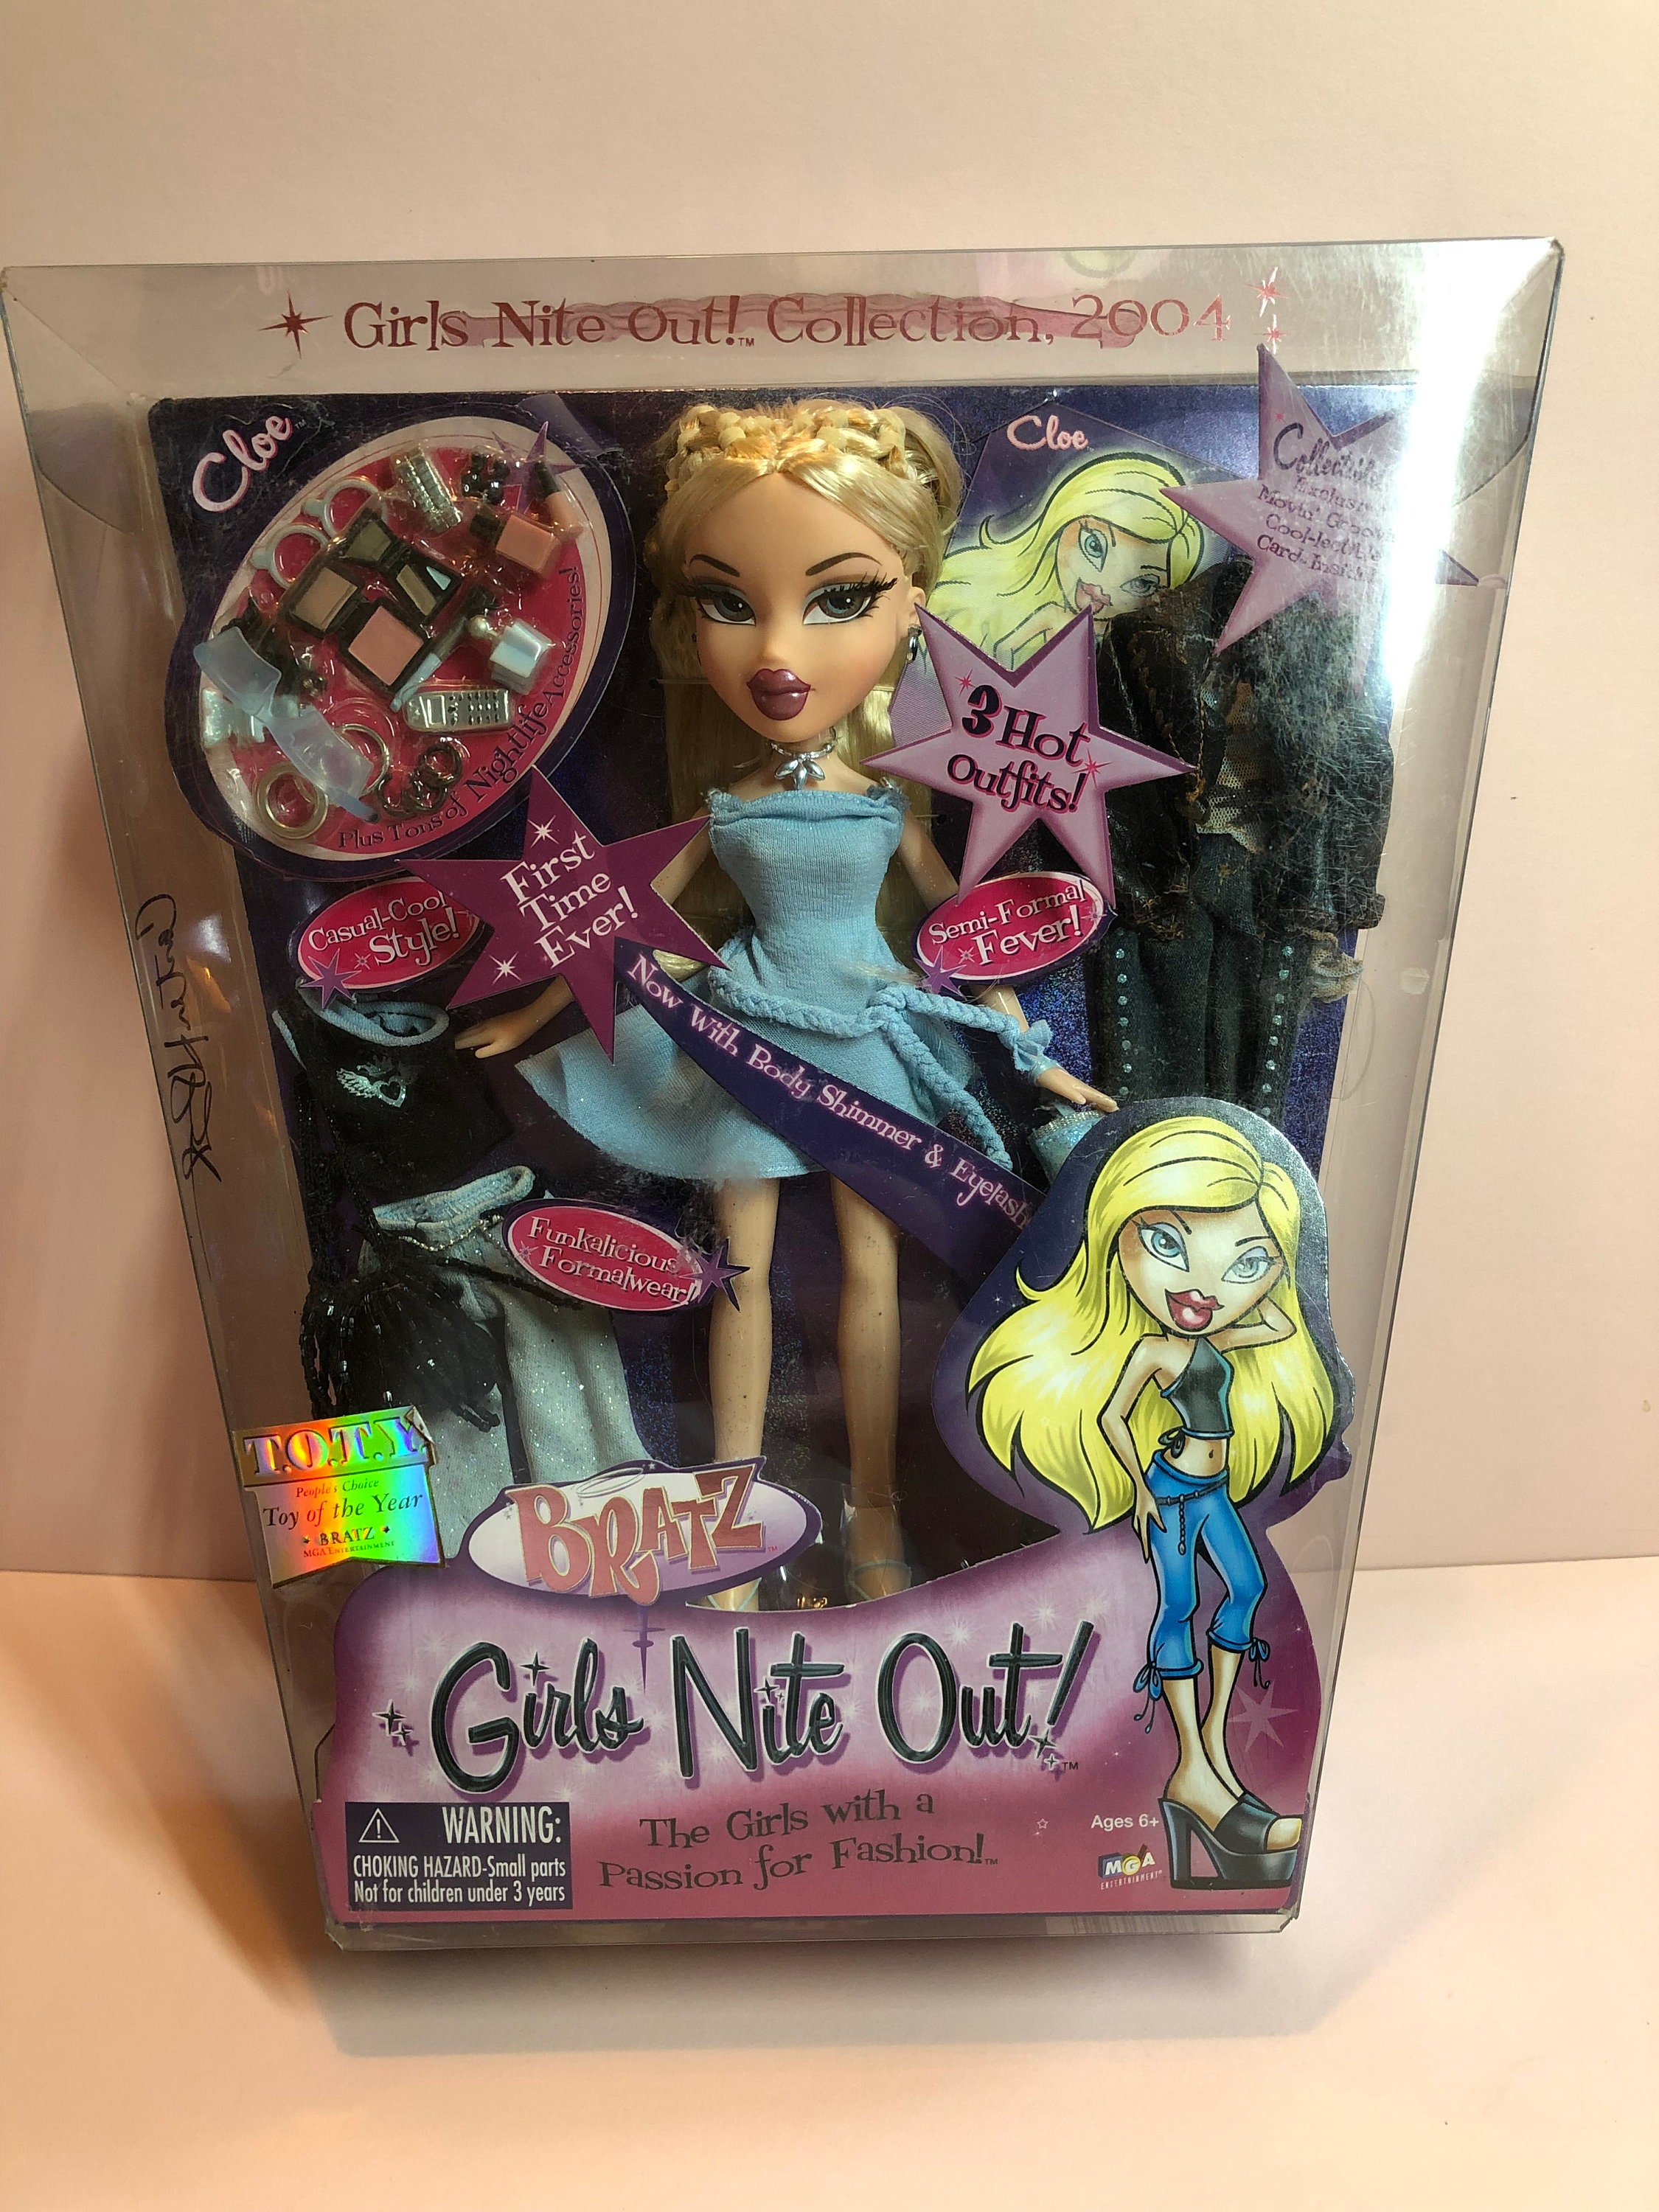 Bratz Girls Night Out Cloe! Original Edition. Autographed by Bratz creator  Carter Bryant. This is from Carter's personal collection